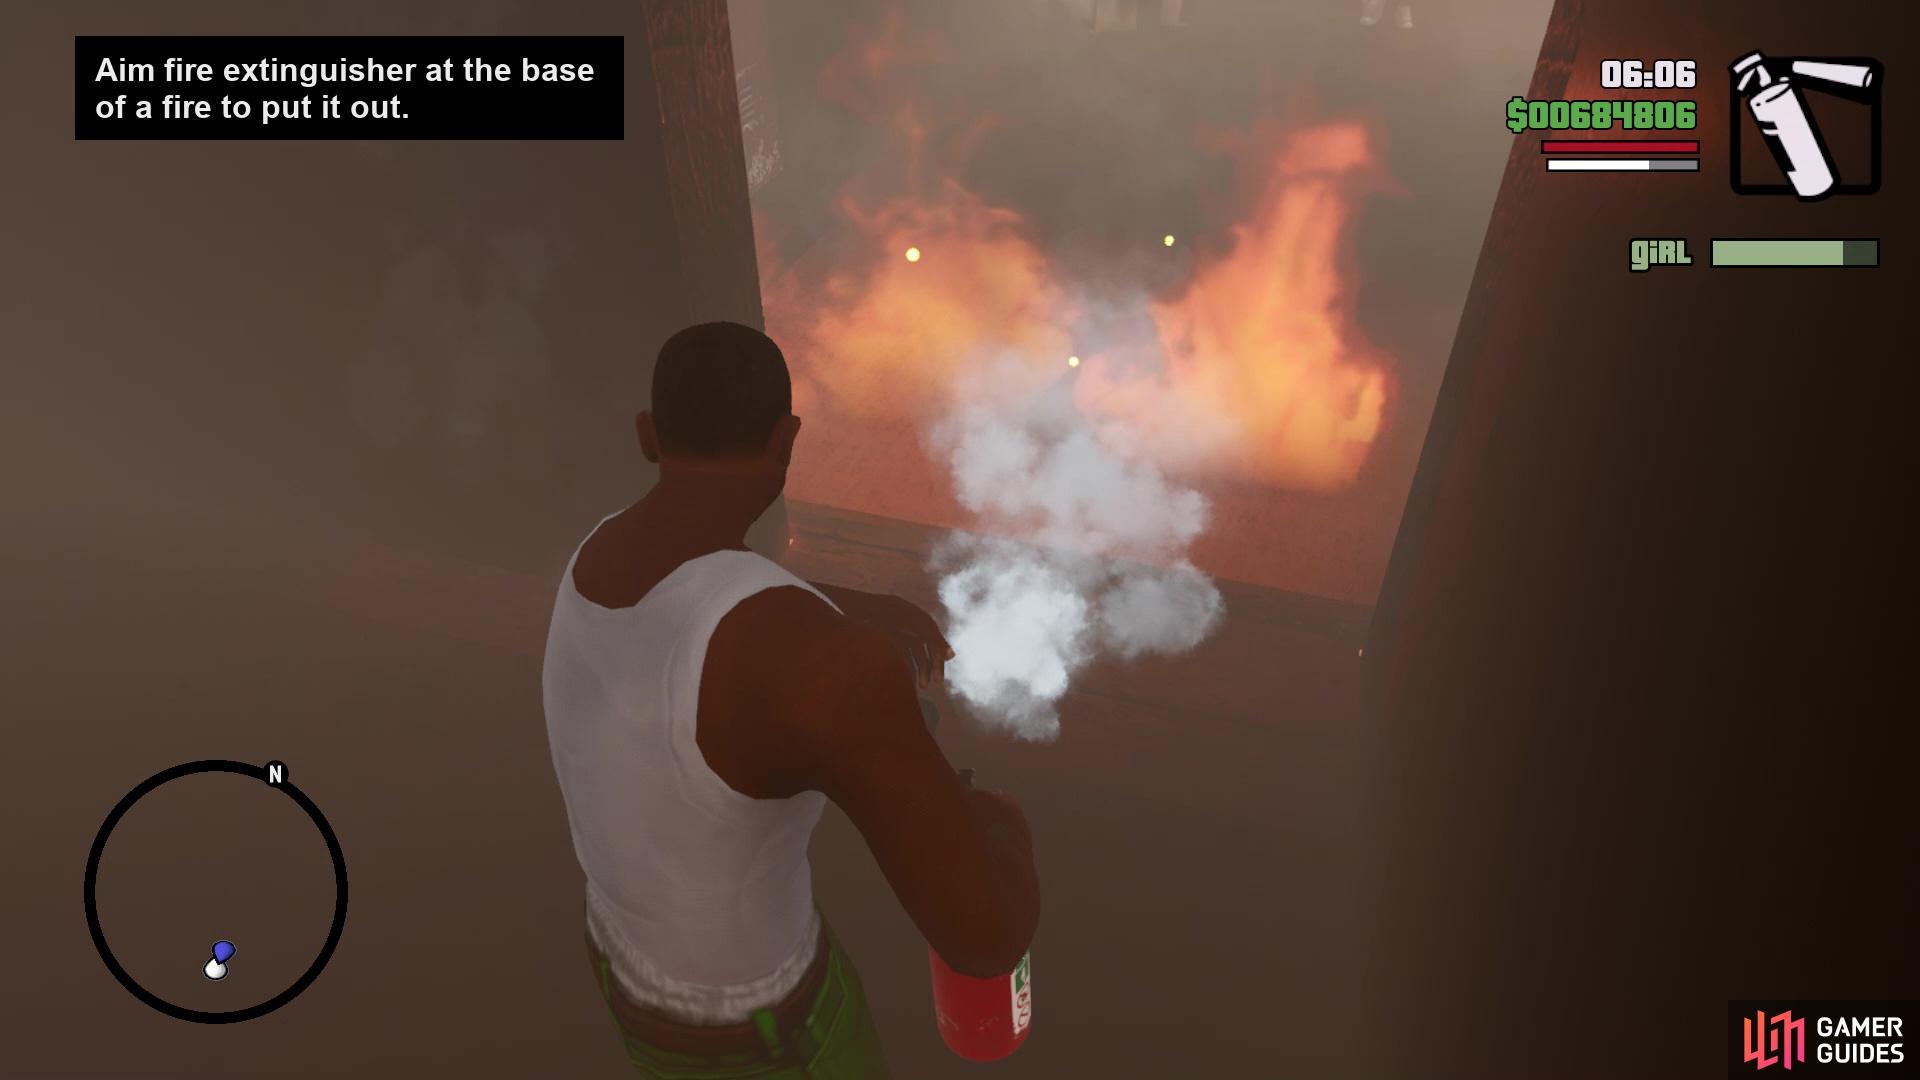 Aim at the base of the fire in order to put it out with the extinguisher